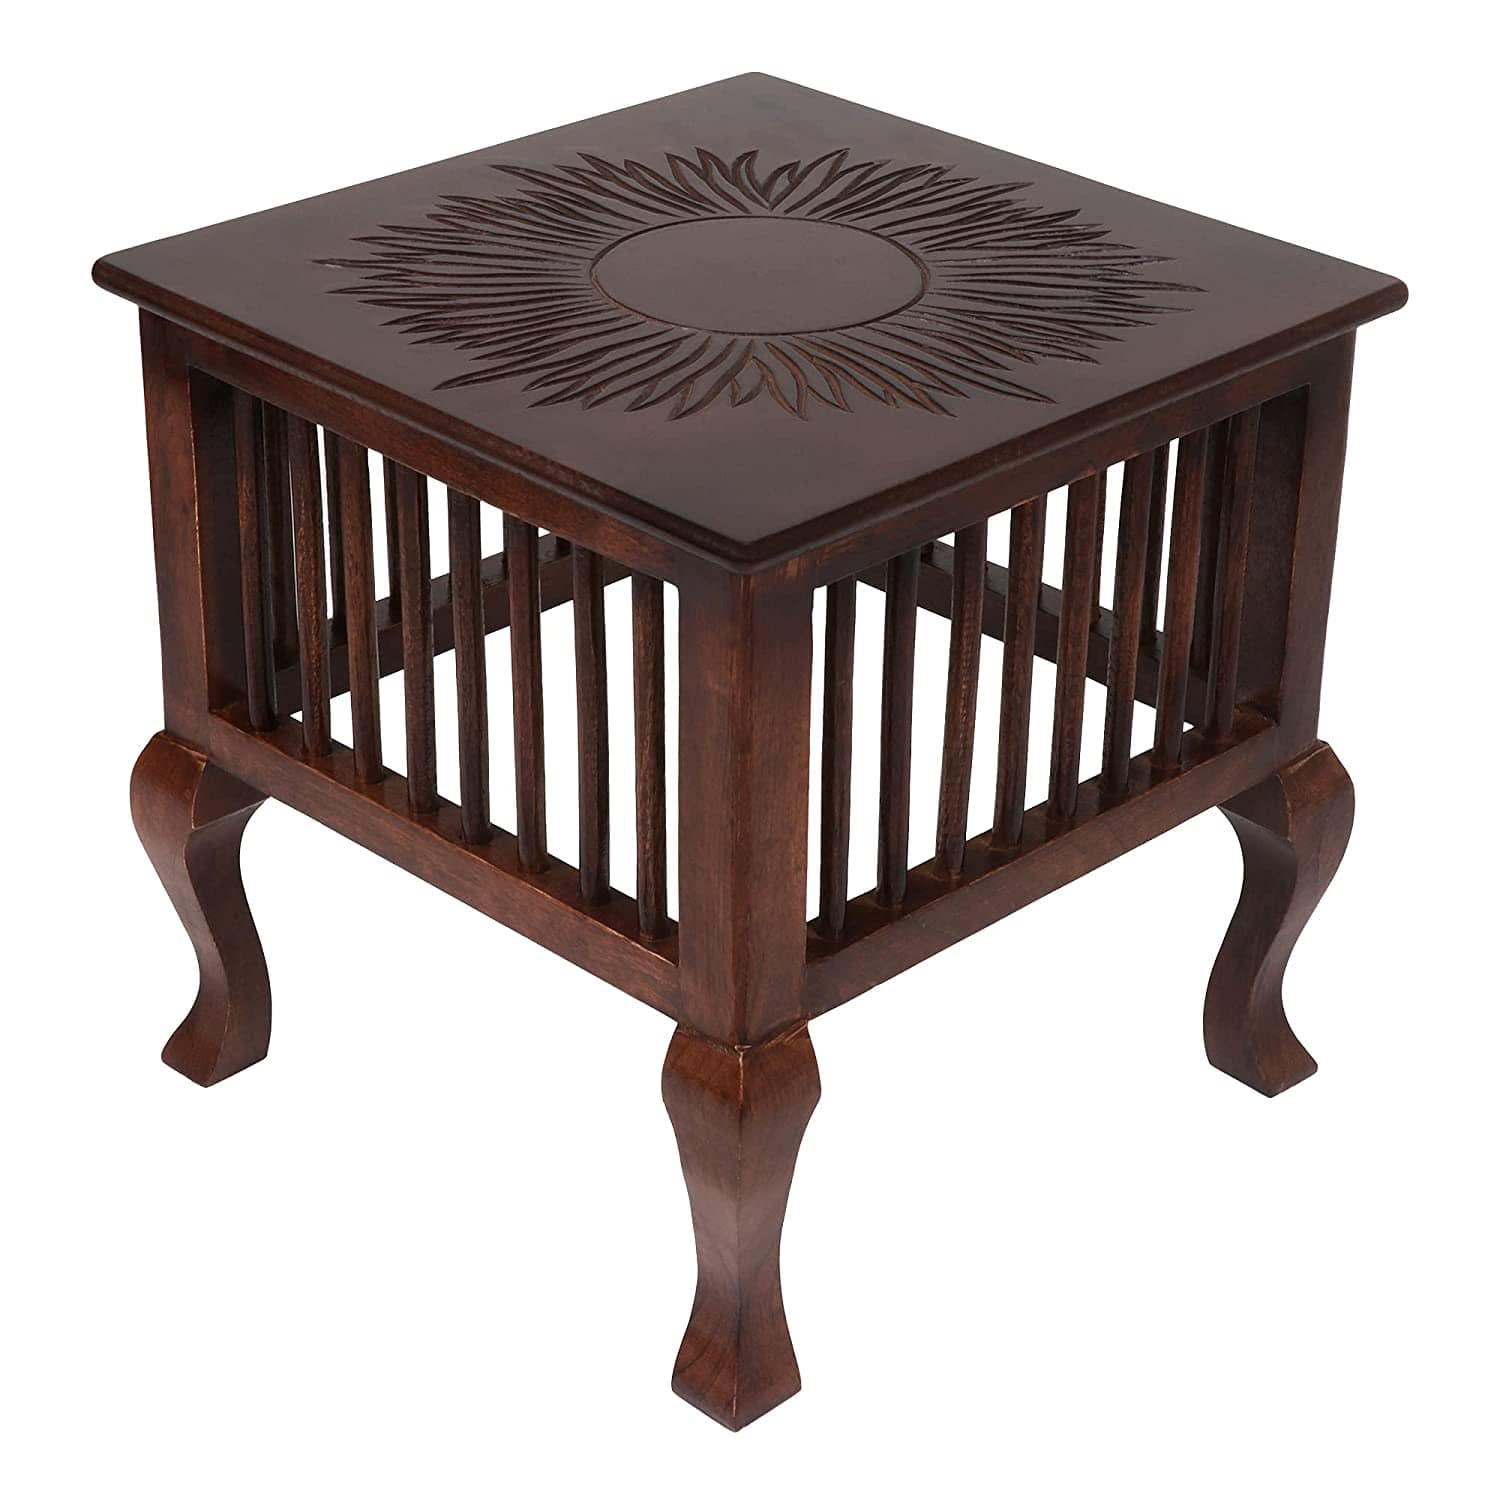 wooden side tables for living room - Mango Wood Walnut Finish Handmade Carving Classic Side Table for Living Room (Brown)